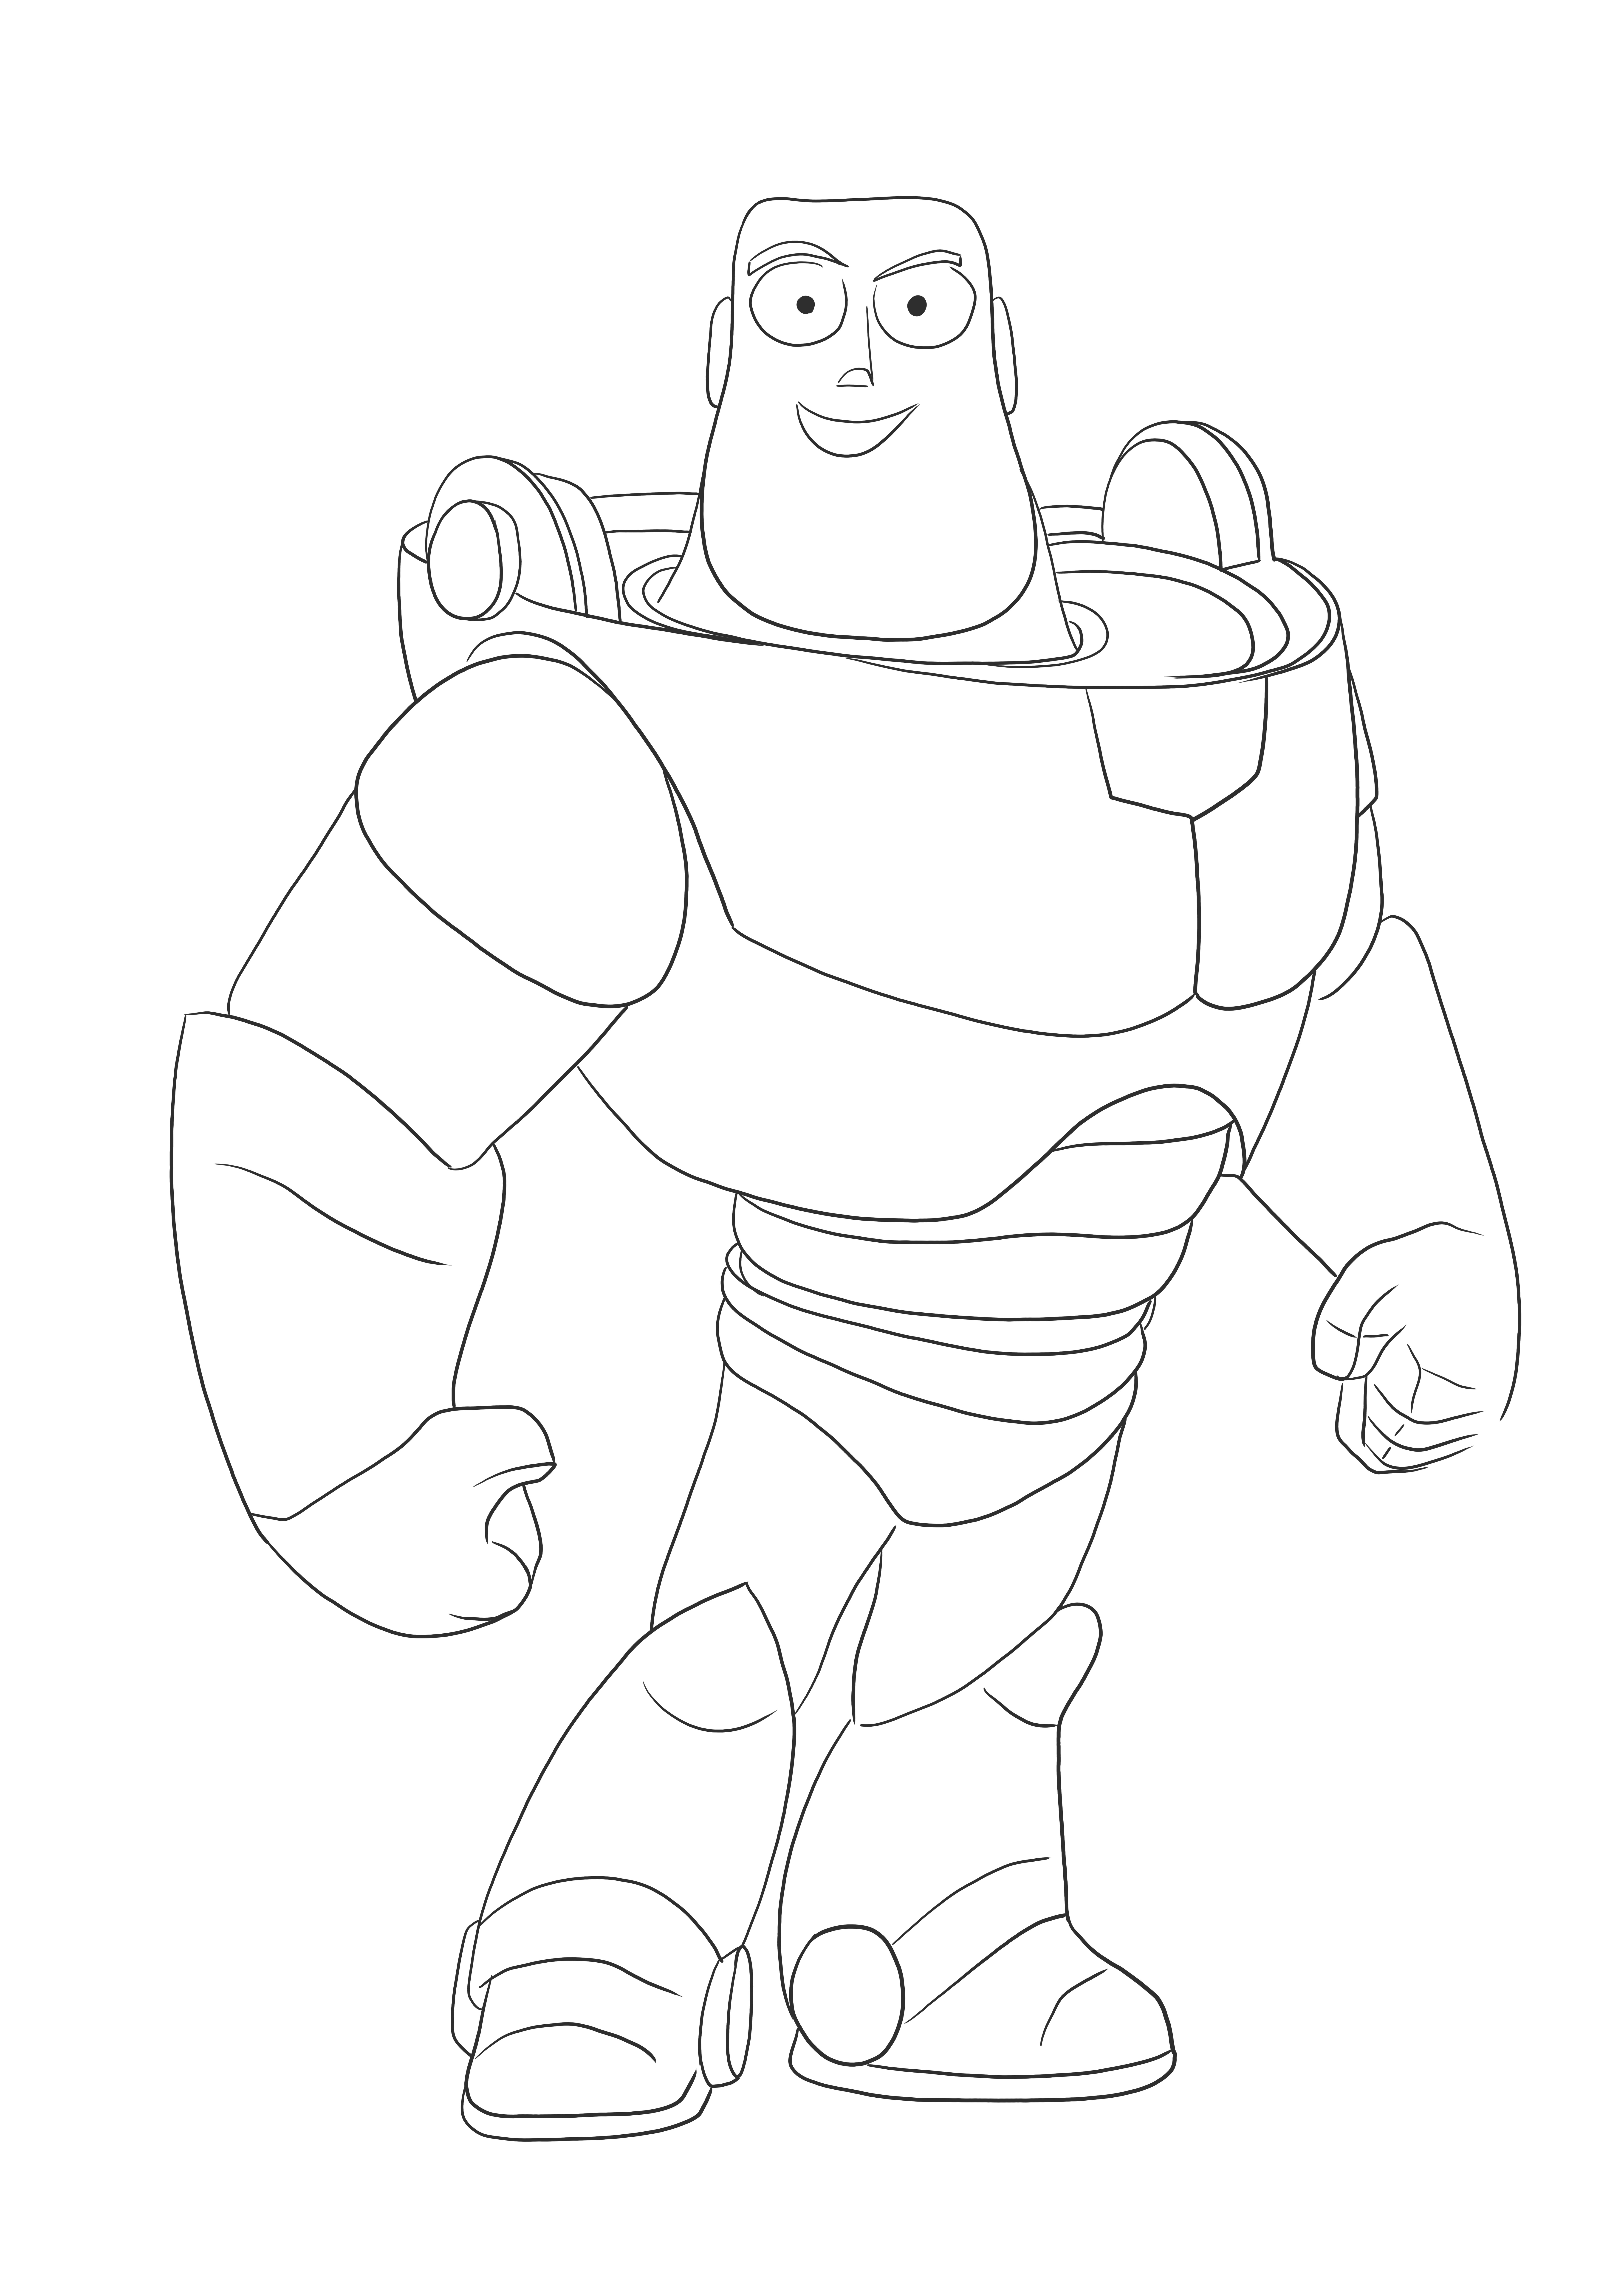 Happy Buzz Lightyear free coloring image and easy printing